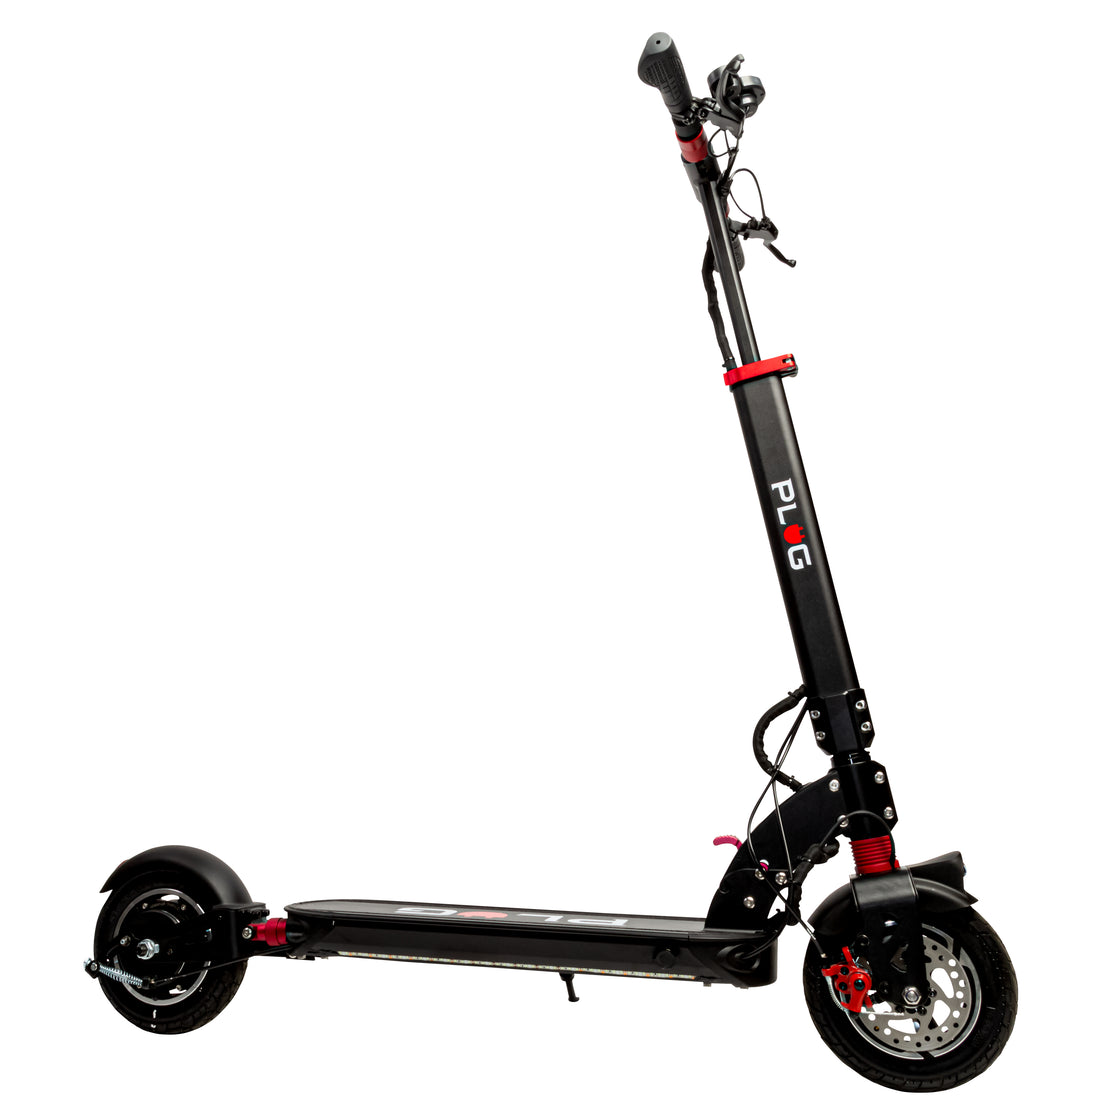 Electric Plug Runner Scooter